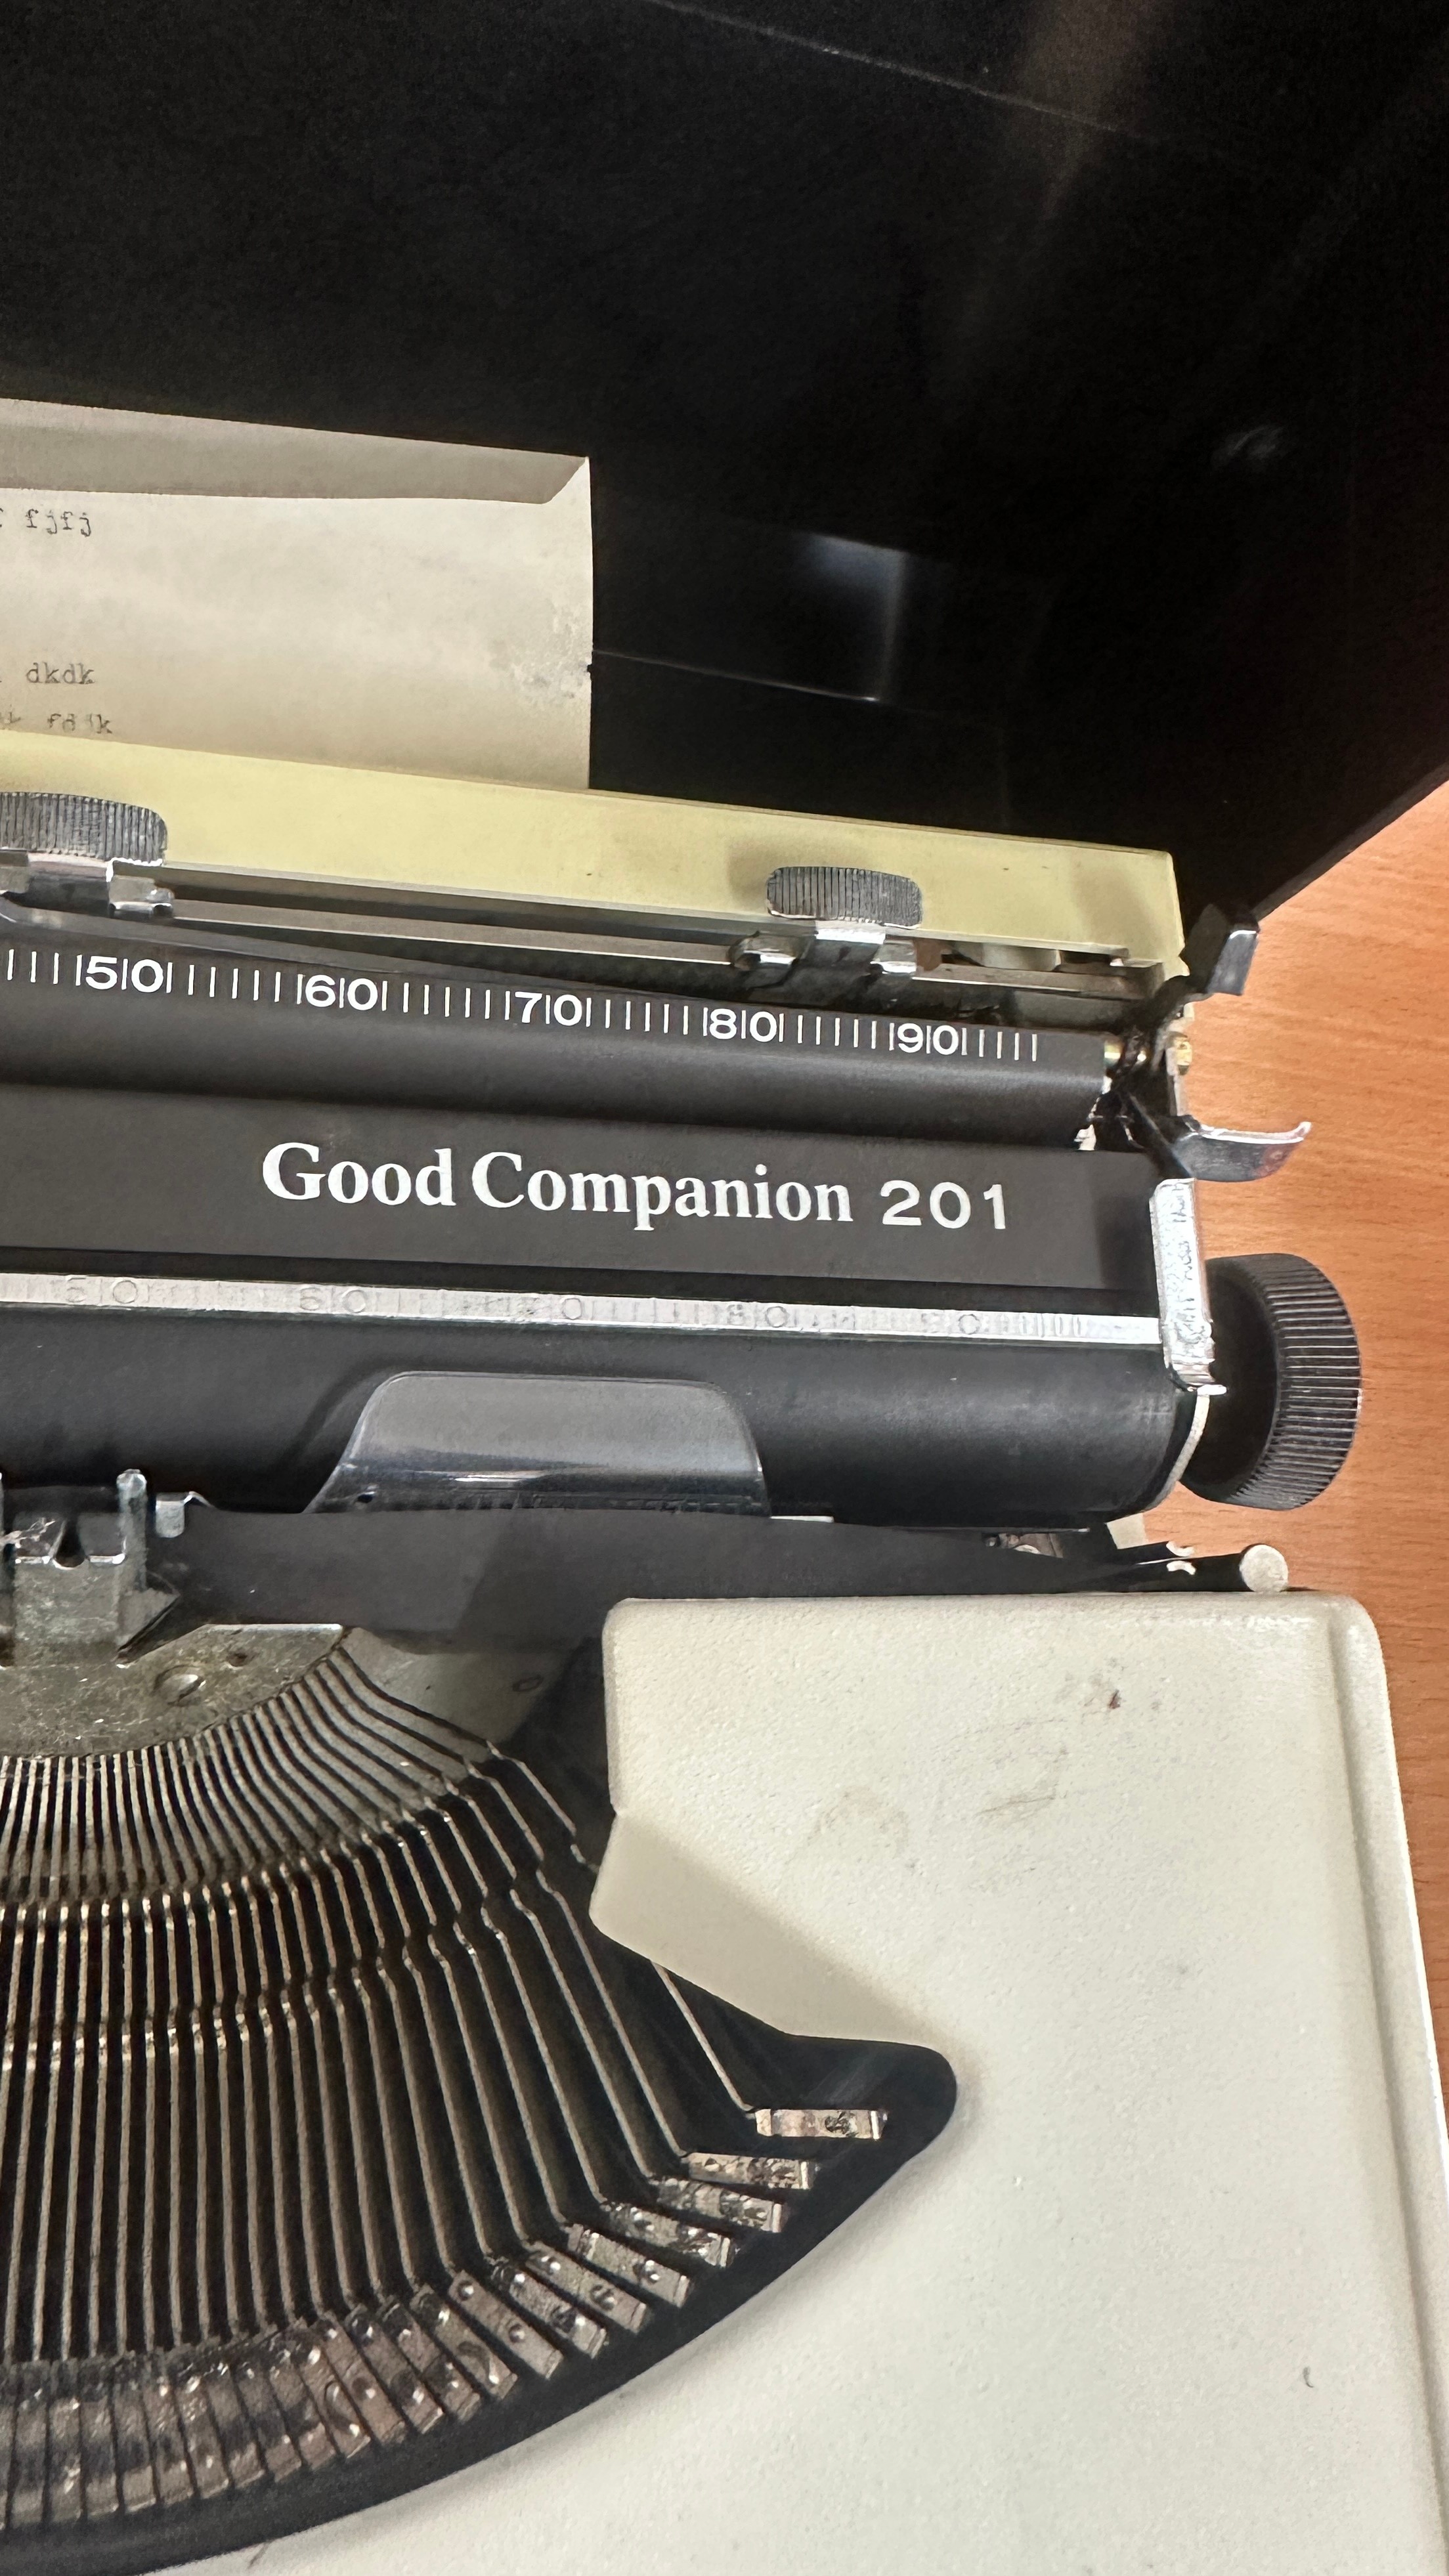 Cased imperial typewriter, good companion 201 - Image 3 of 3